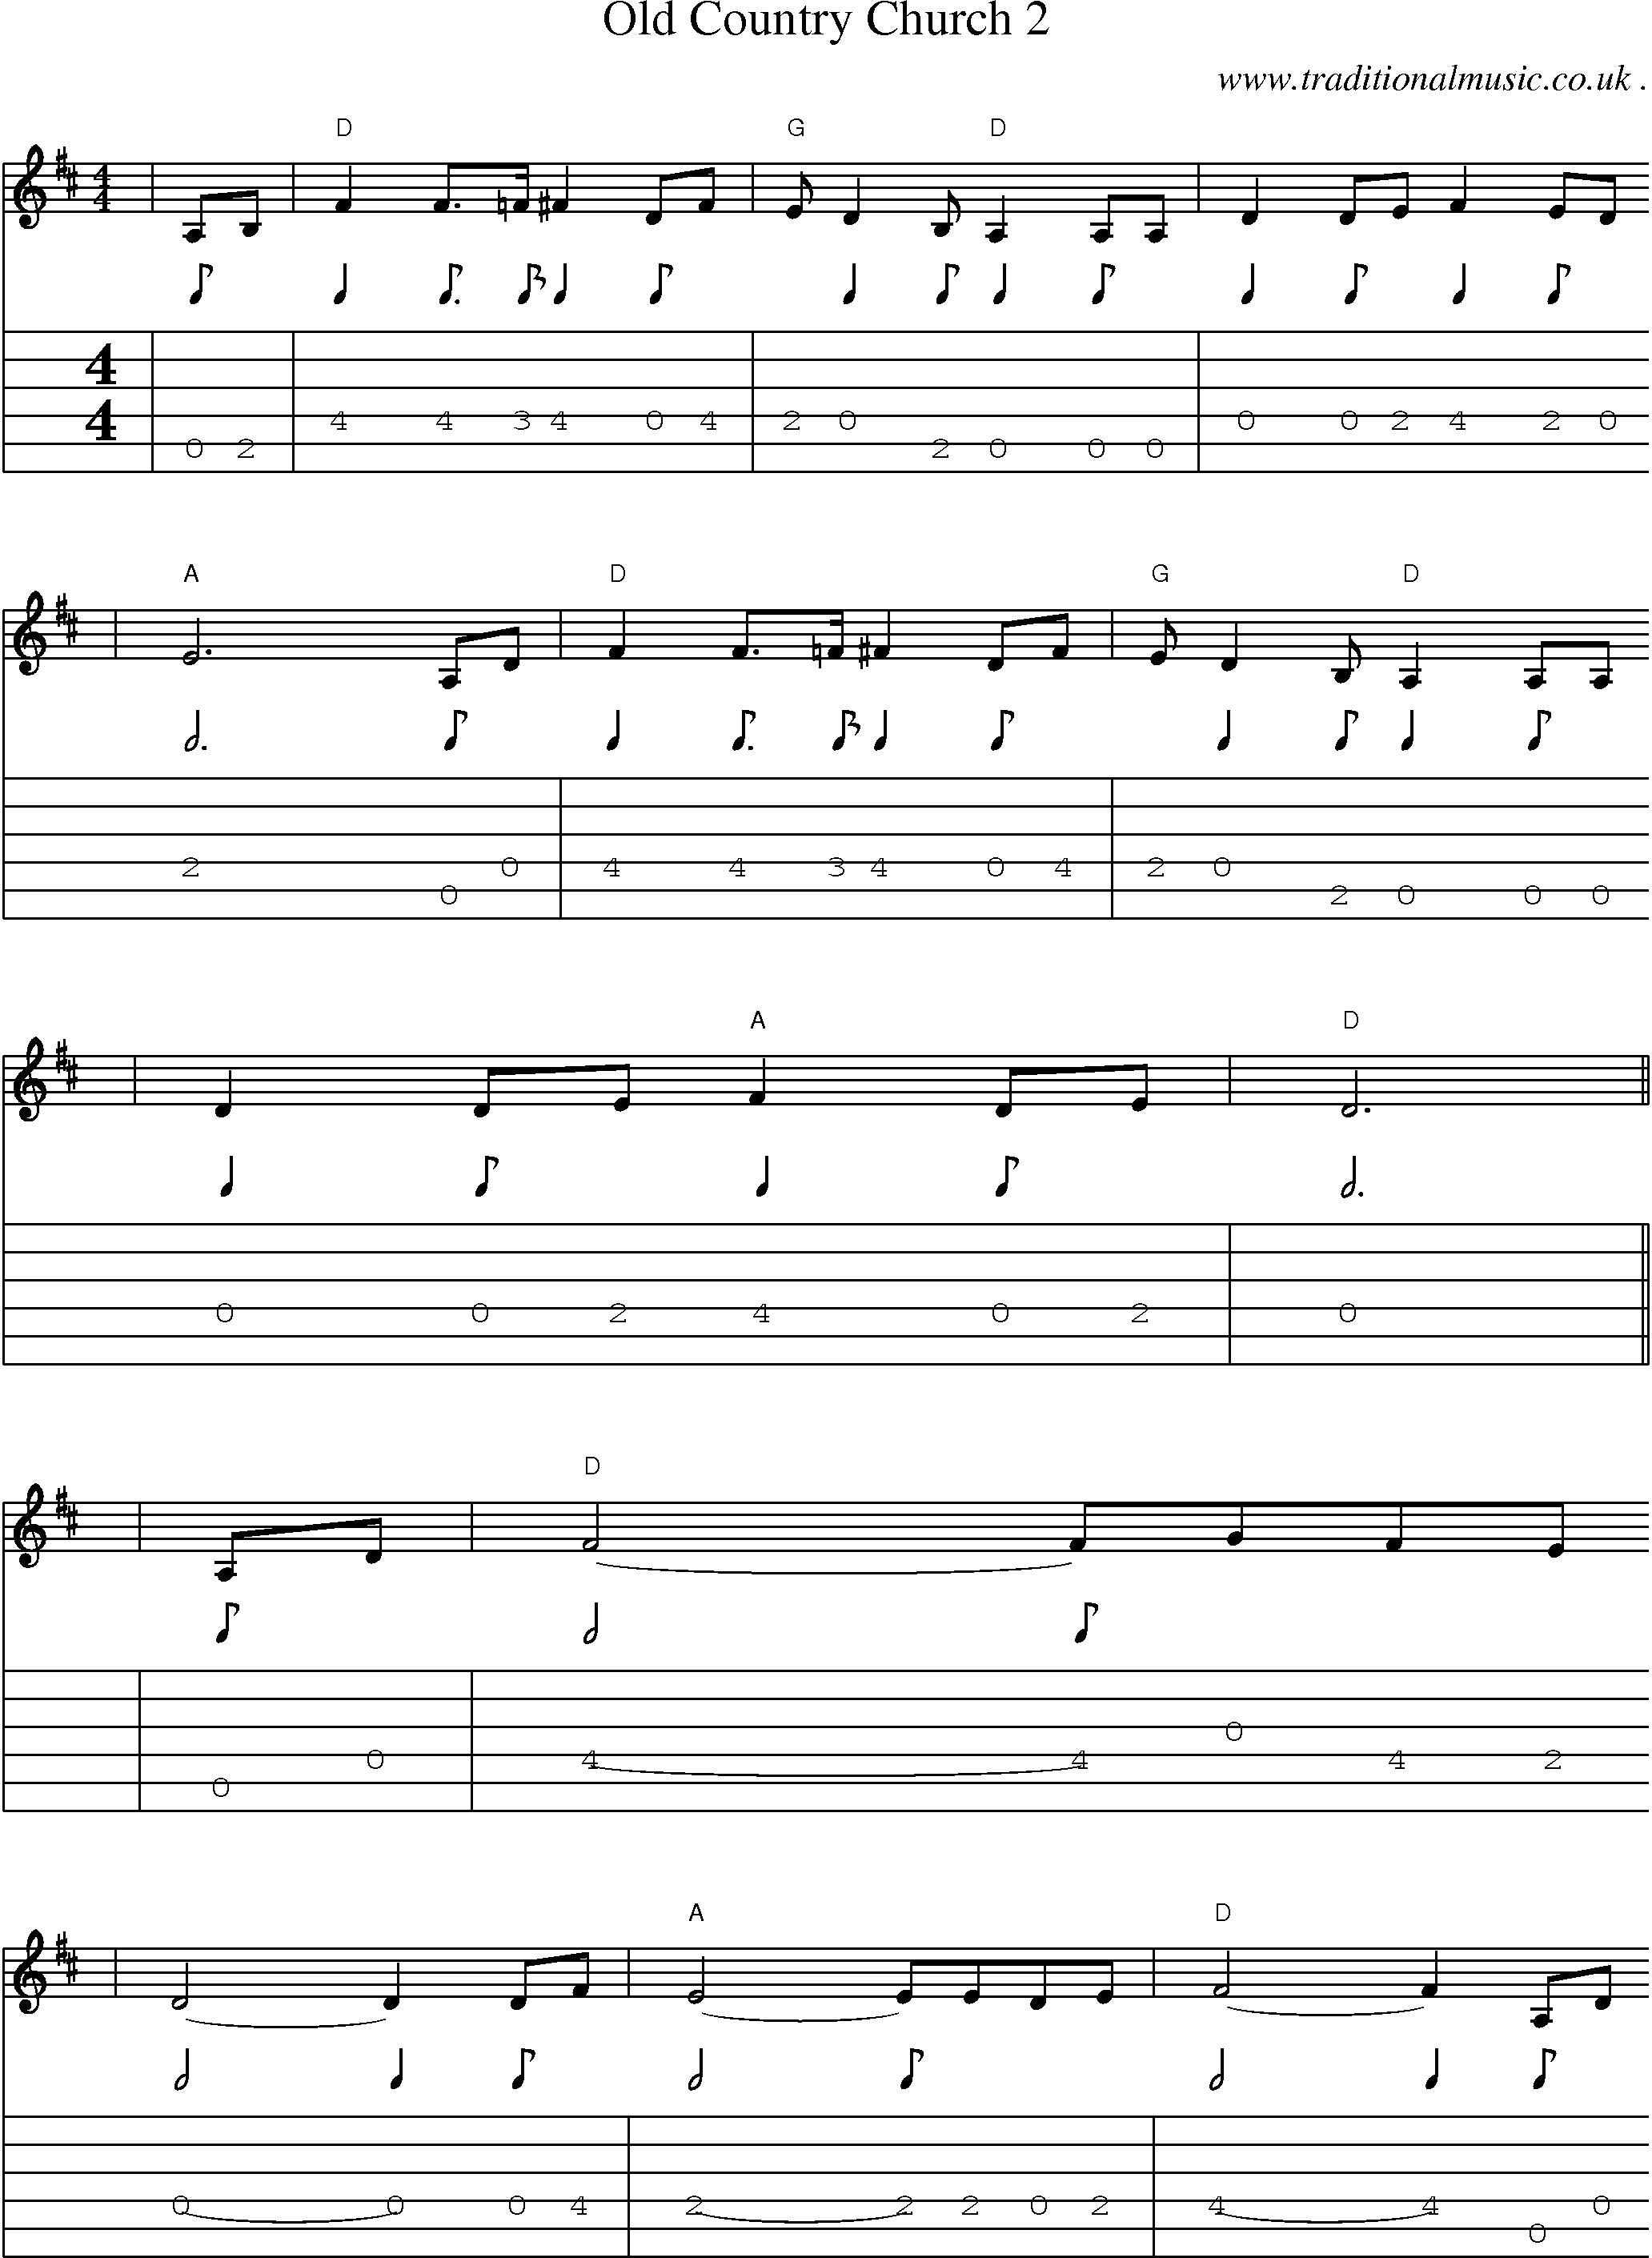 Music Score and Guitar Tabs for Old Country Church 2